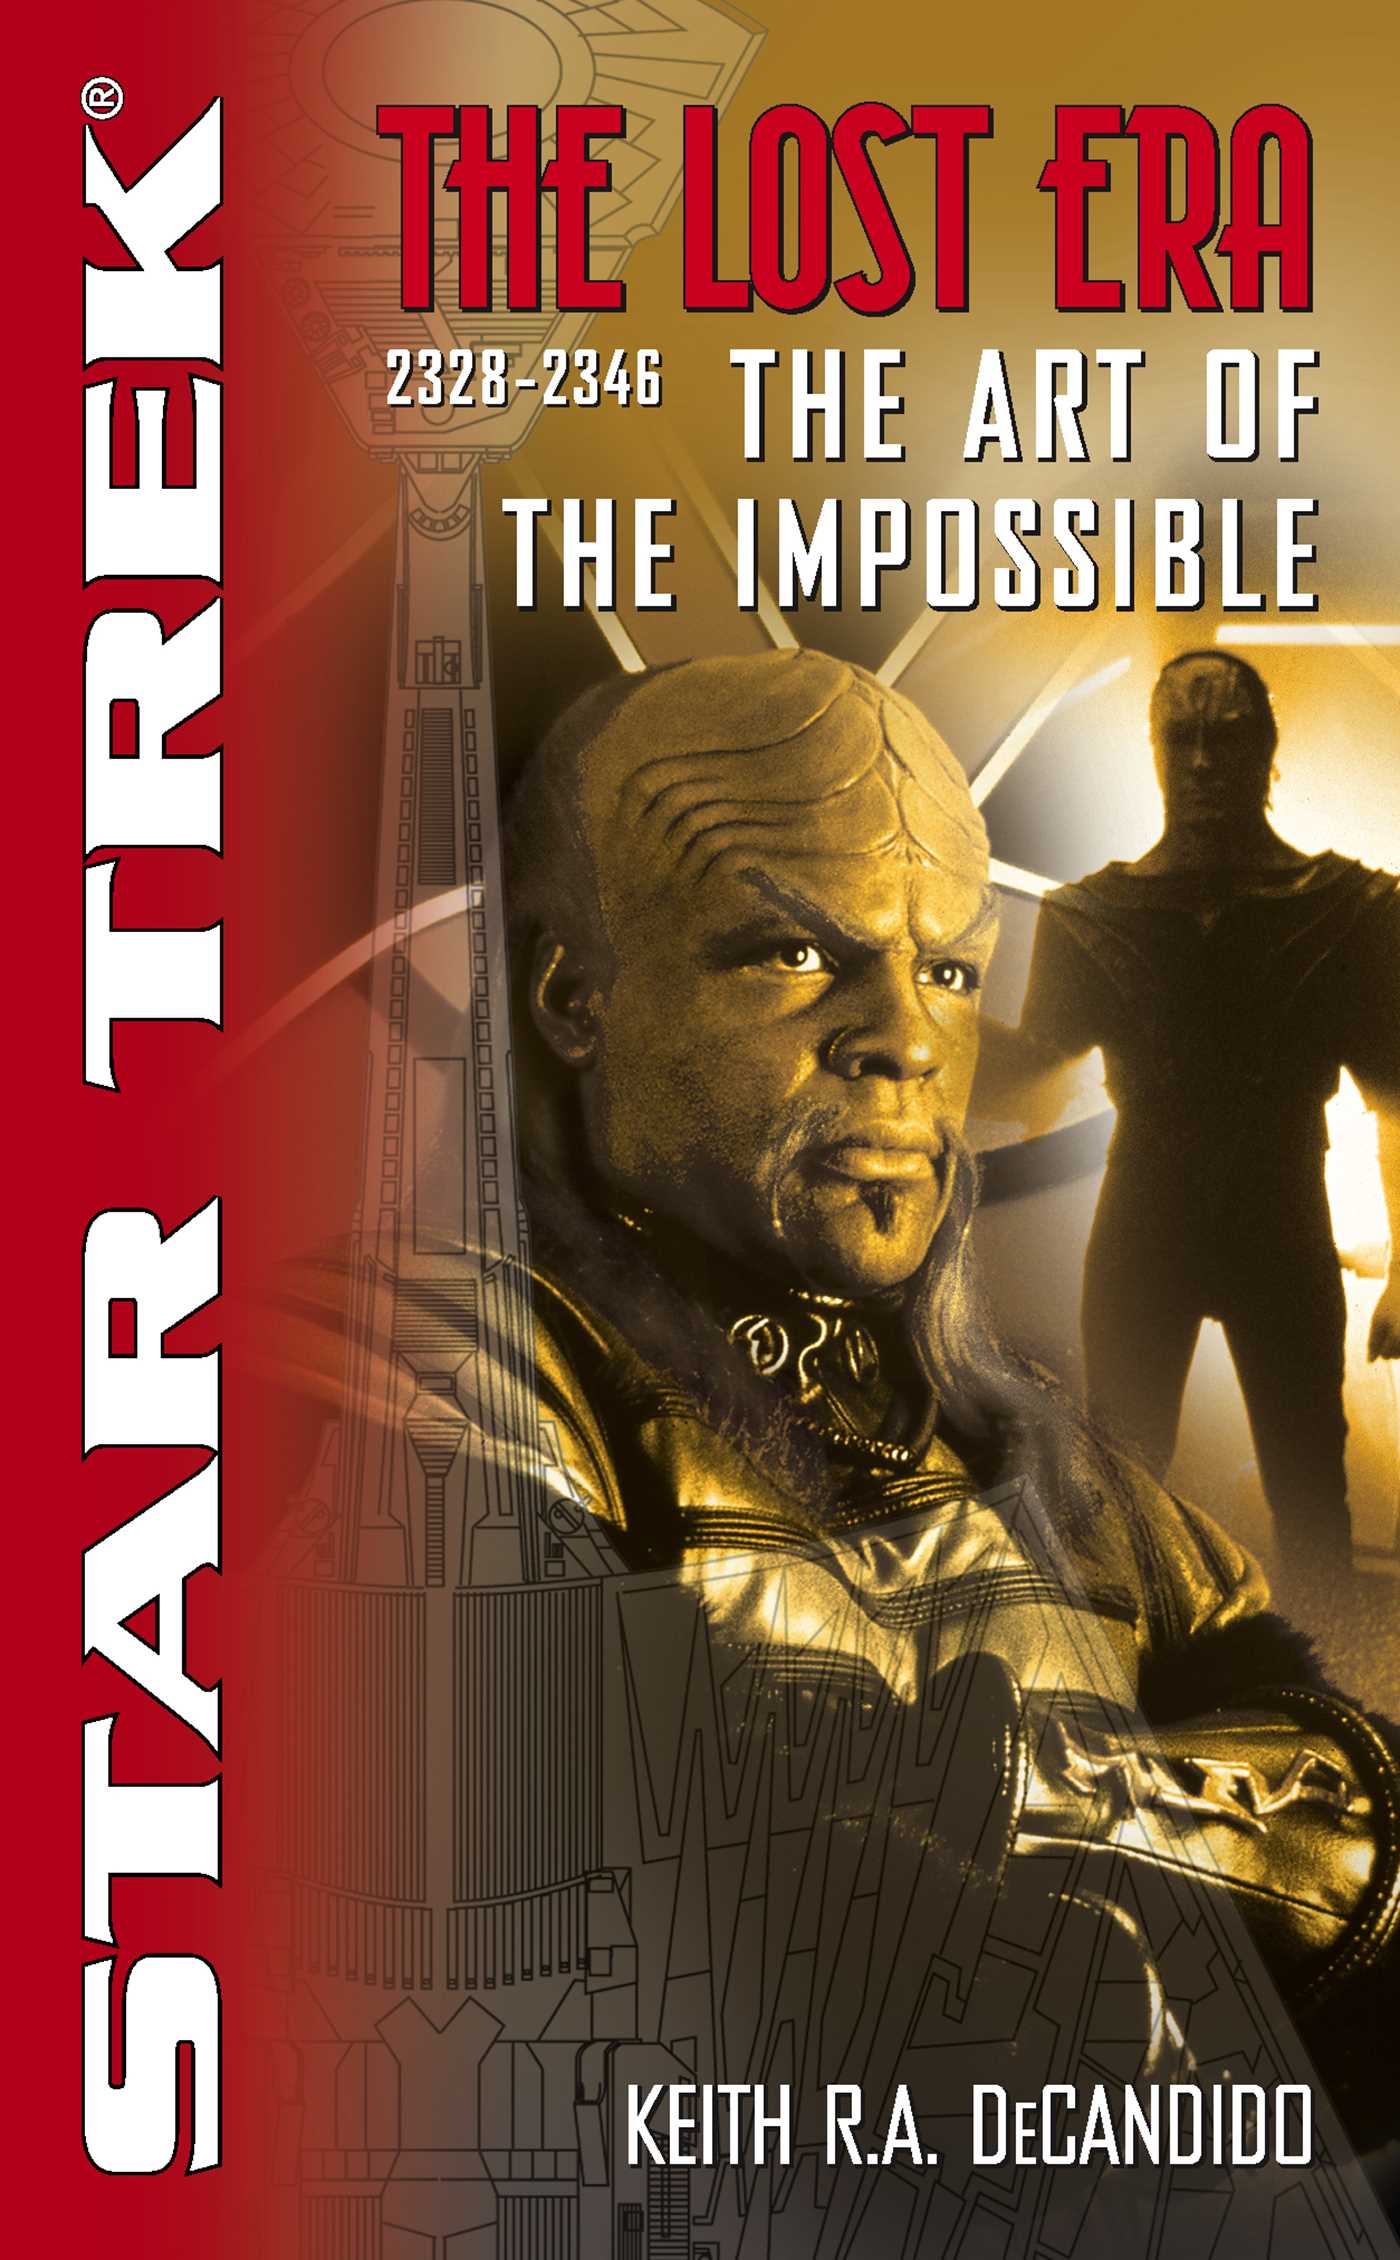 “Star Trek: The Lost Era: The Art Of The Impossible” Review by Kag.org